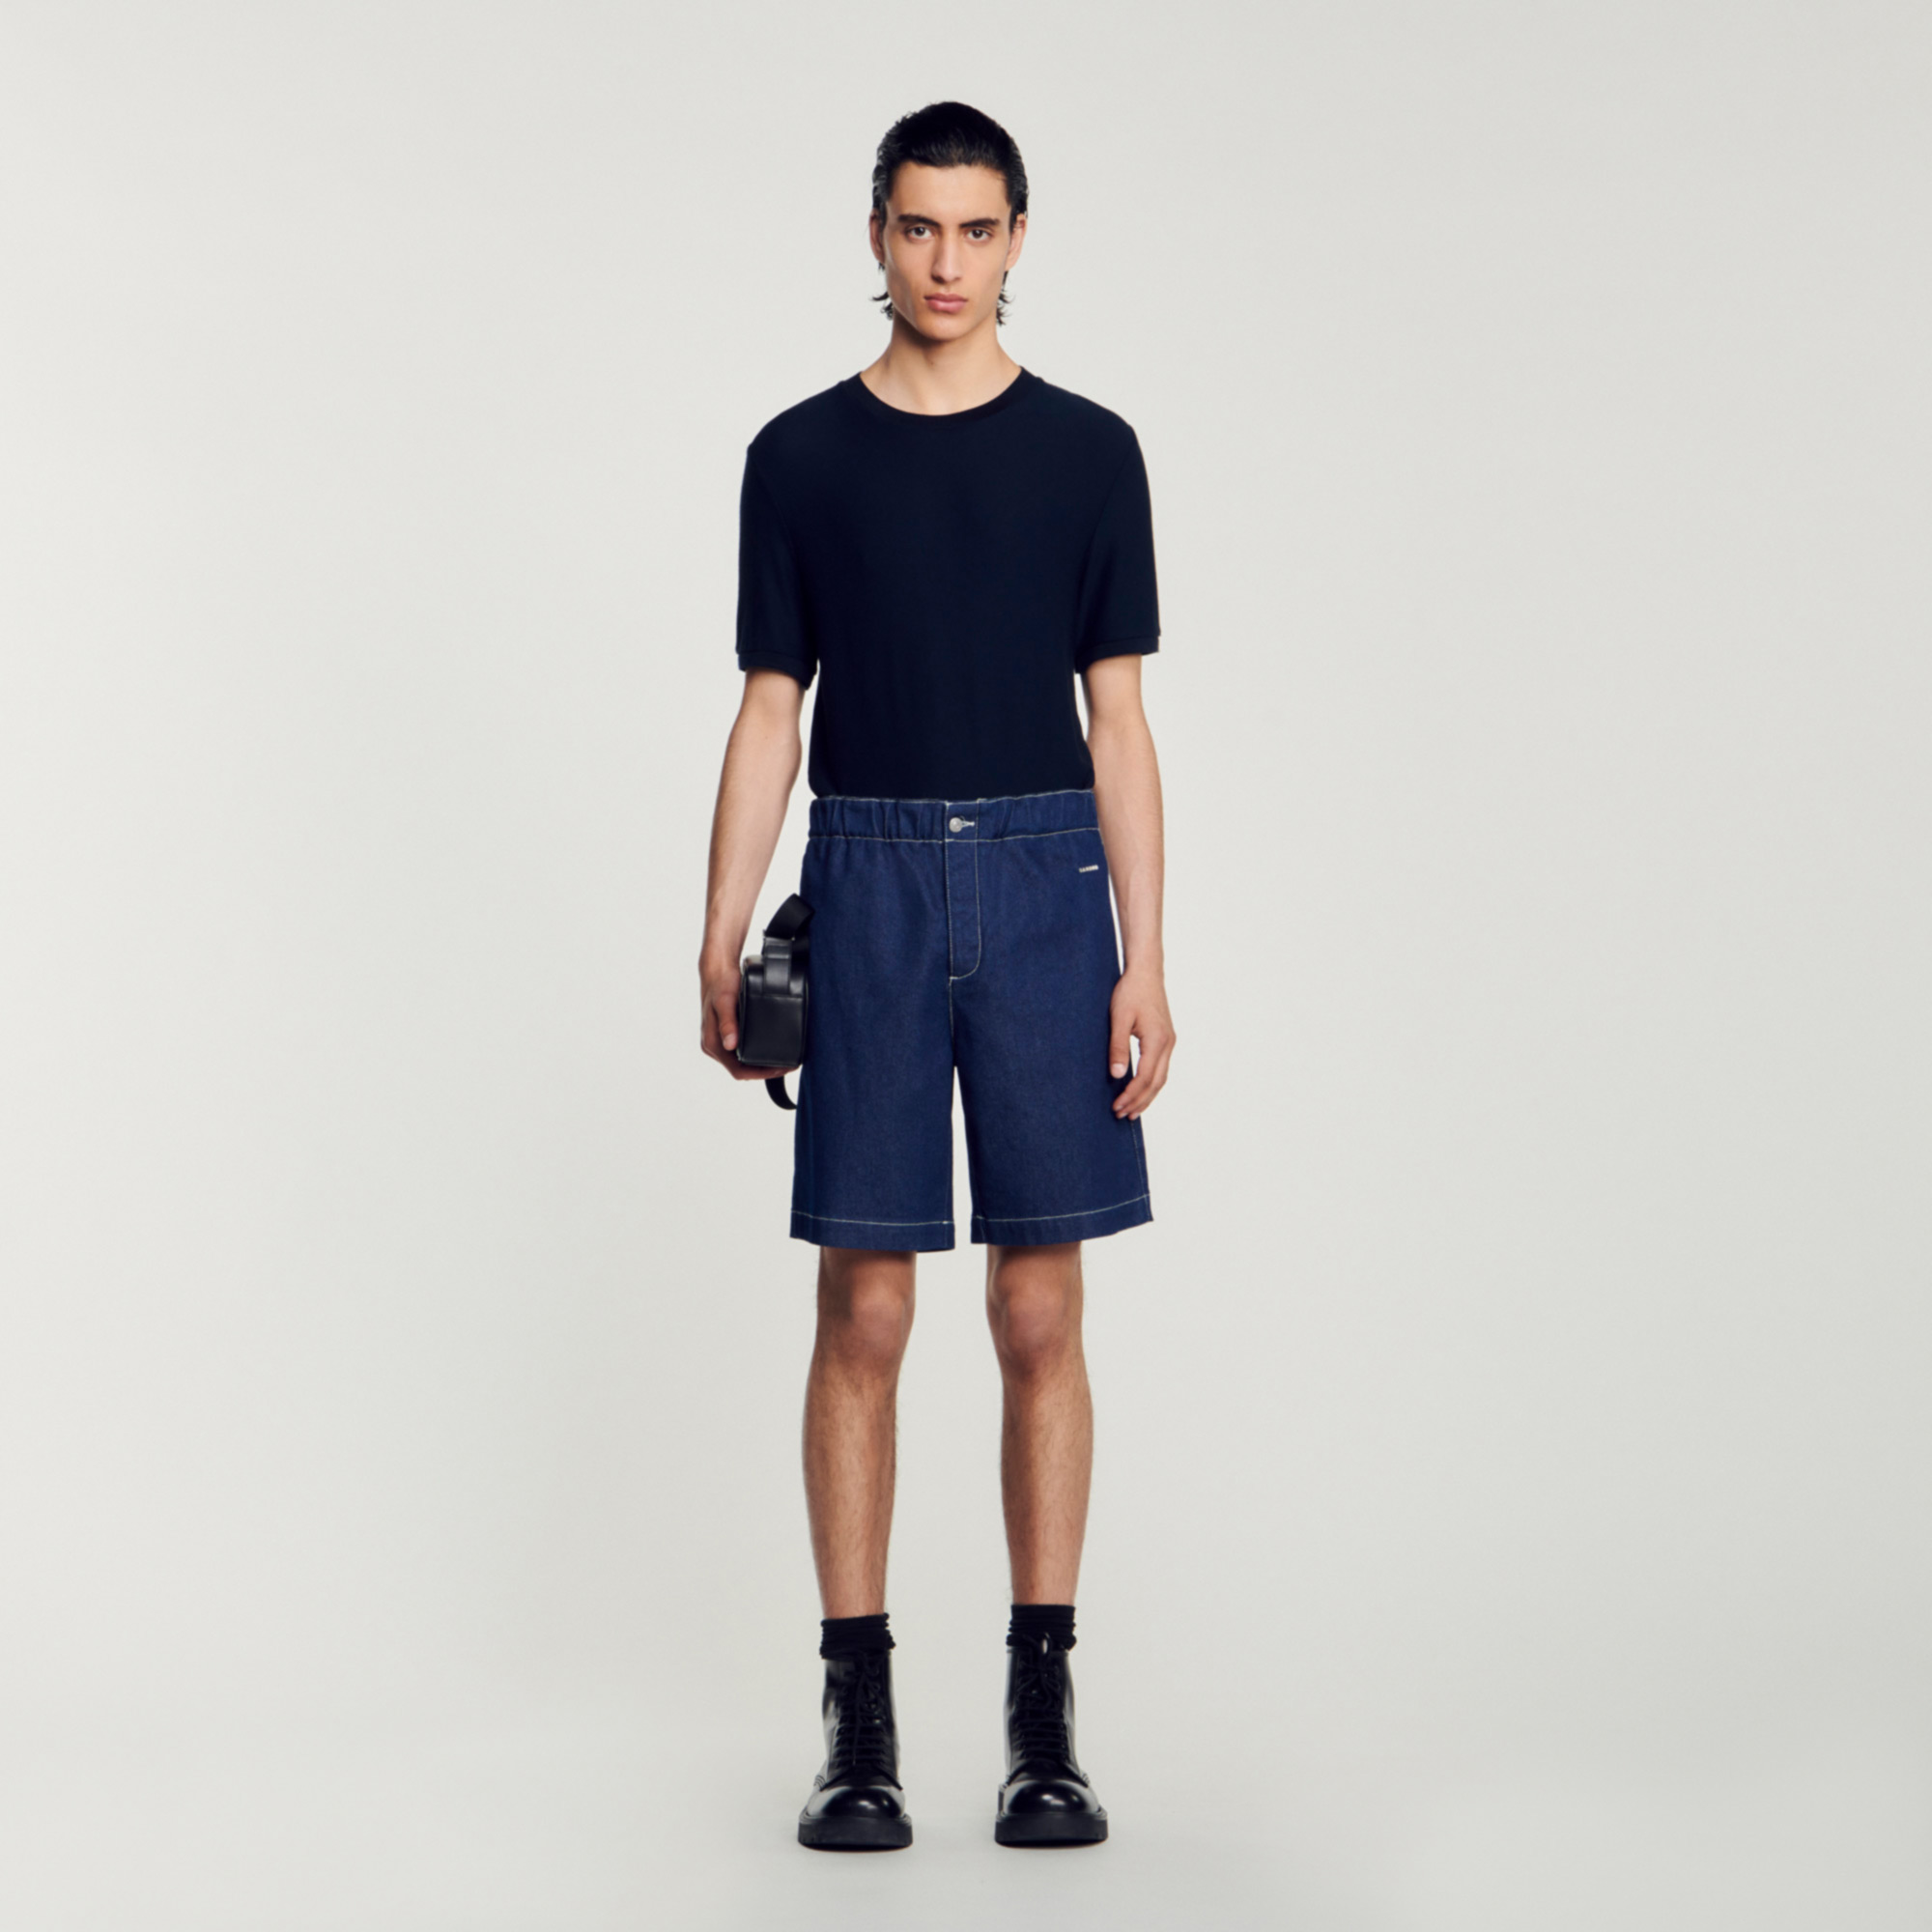 Sandro cotton Untreated denim shorts with an elasticated waist and contrasting topstitching